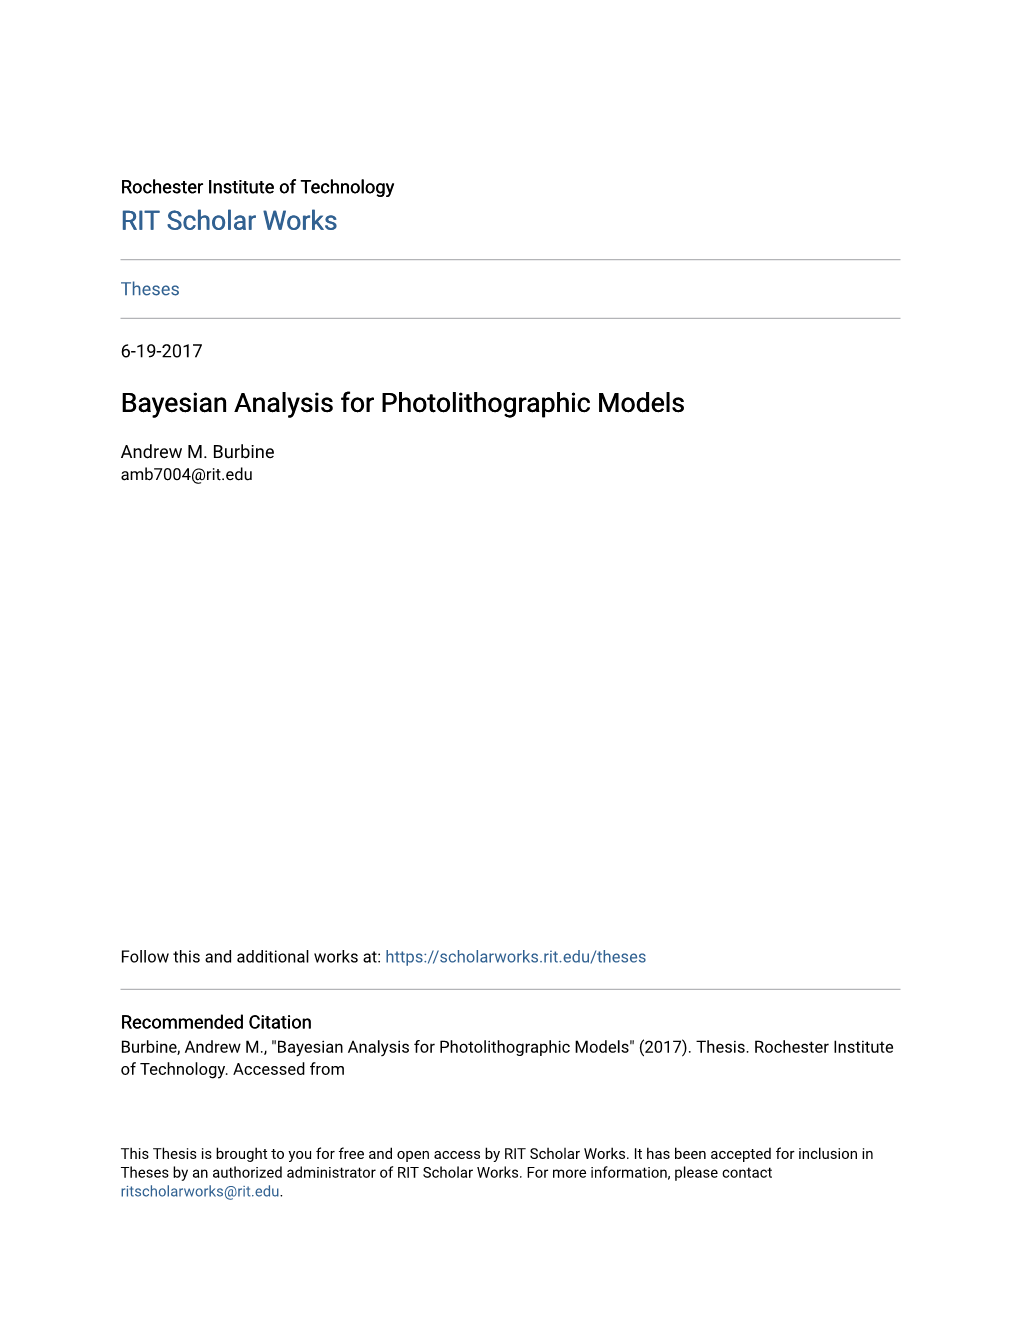 Bayesian Analysis for Photolithographic Models